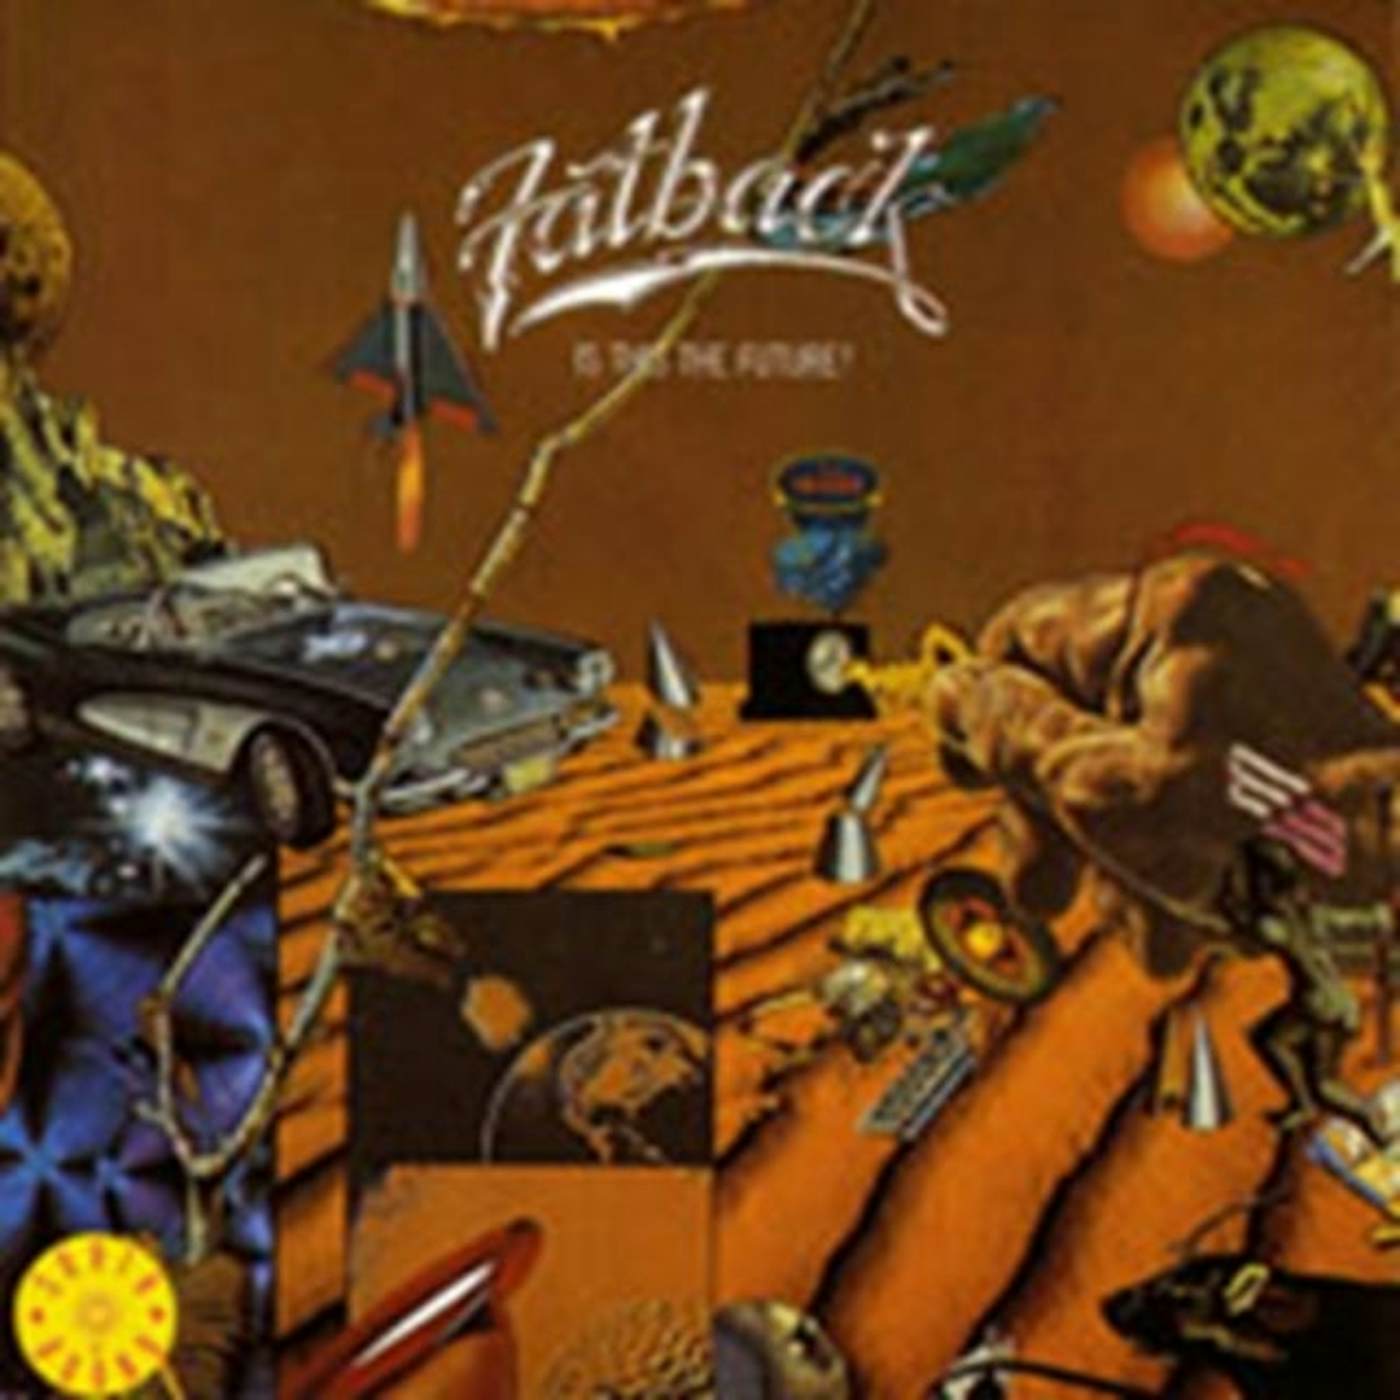 Fatback Band CD - Is This The Future